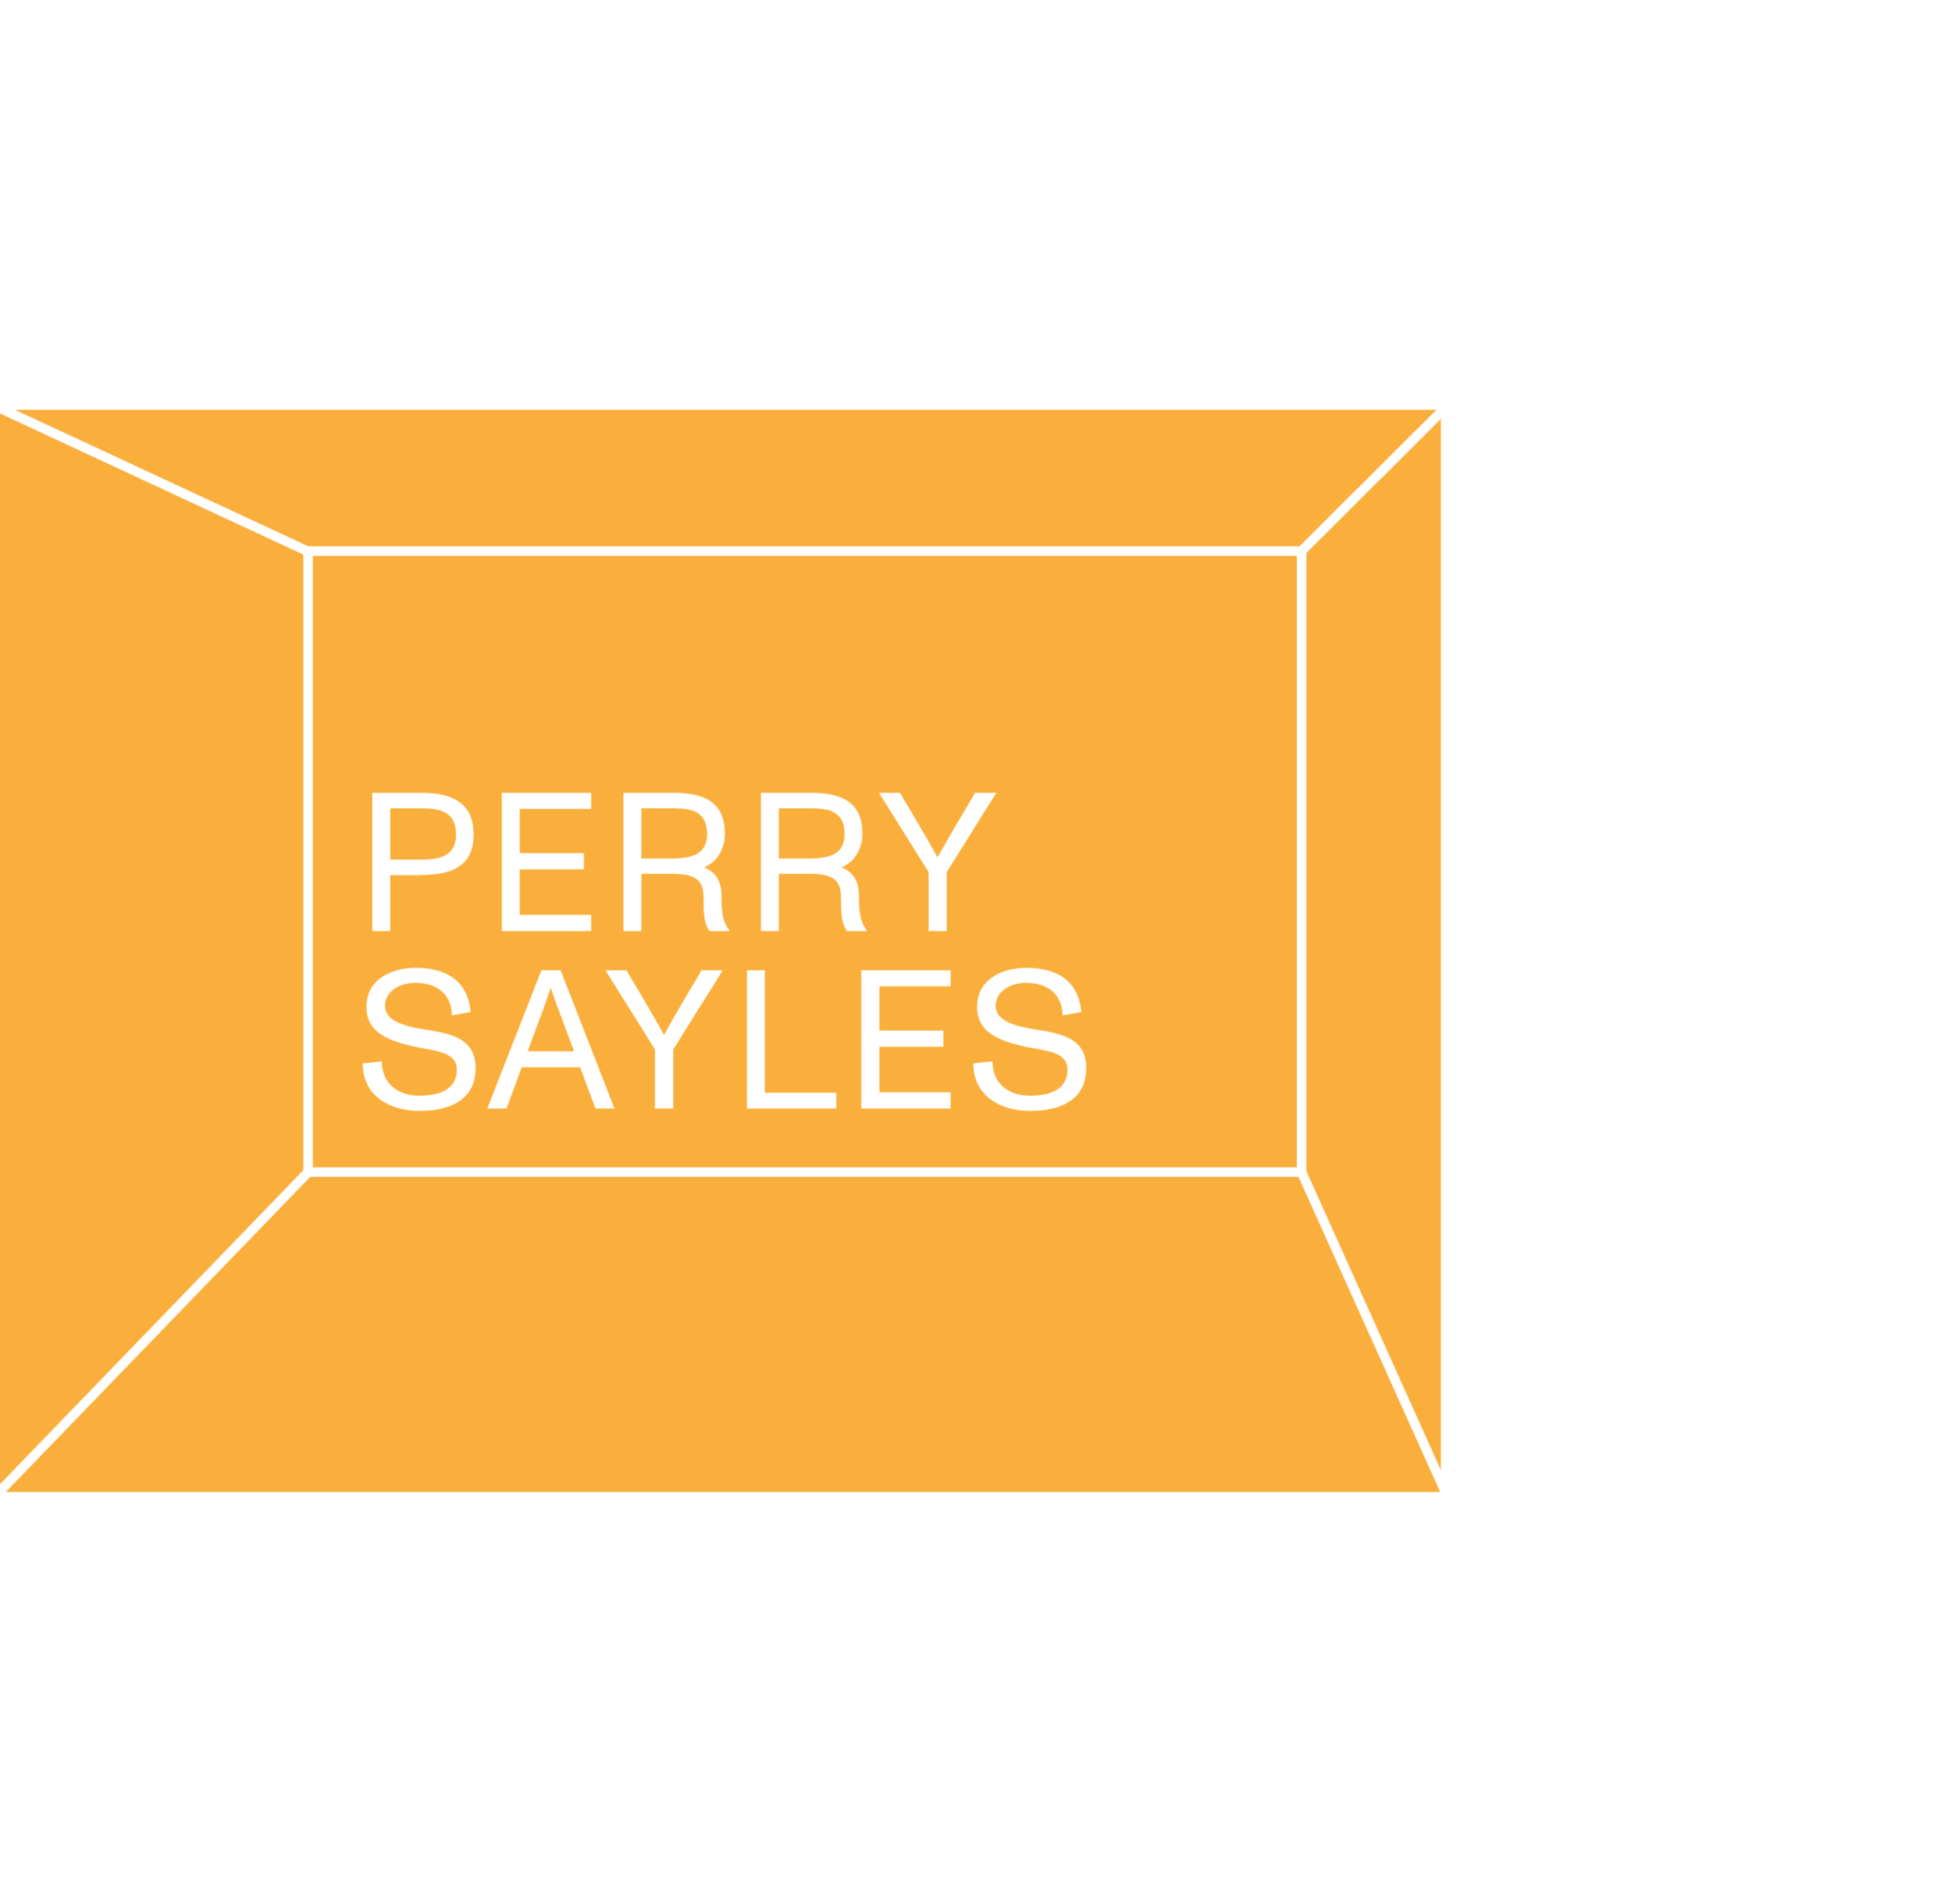 PERRY SAYLES